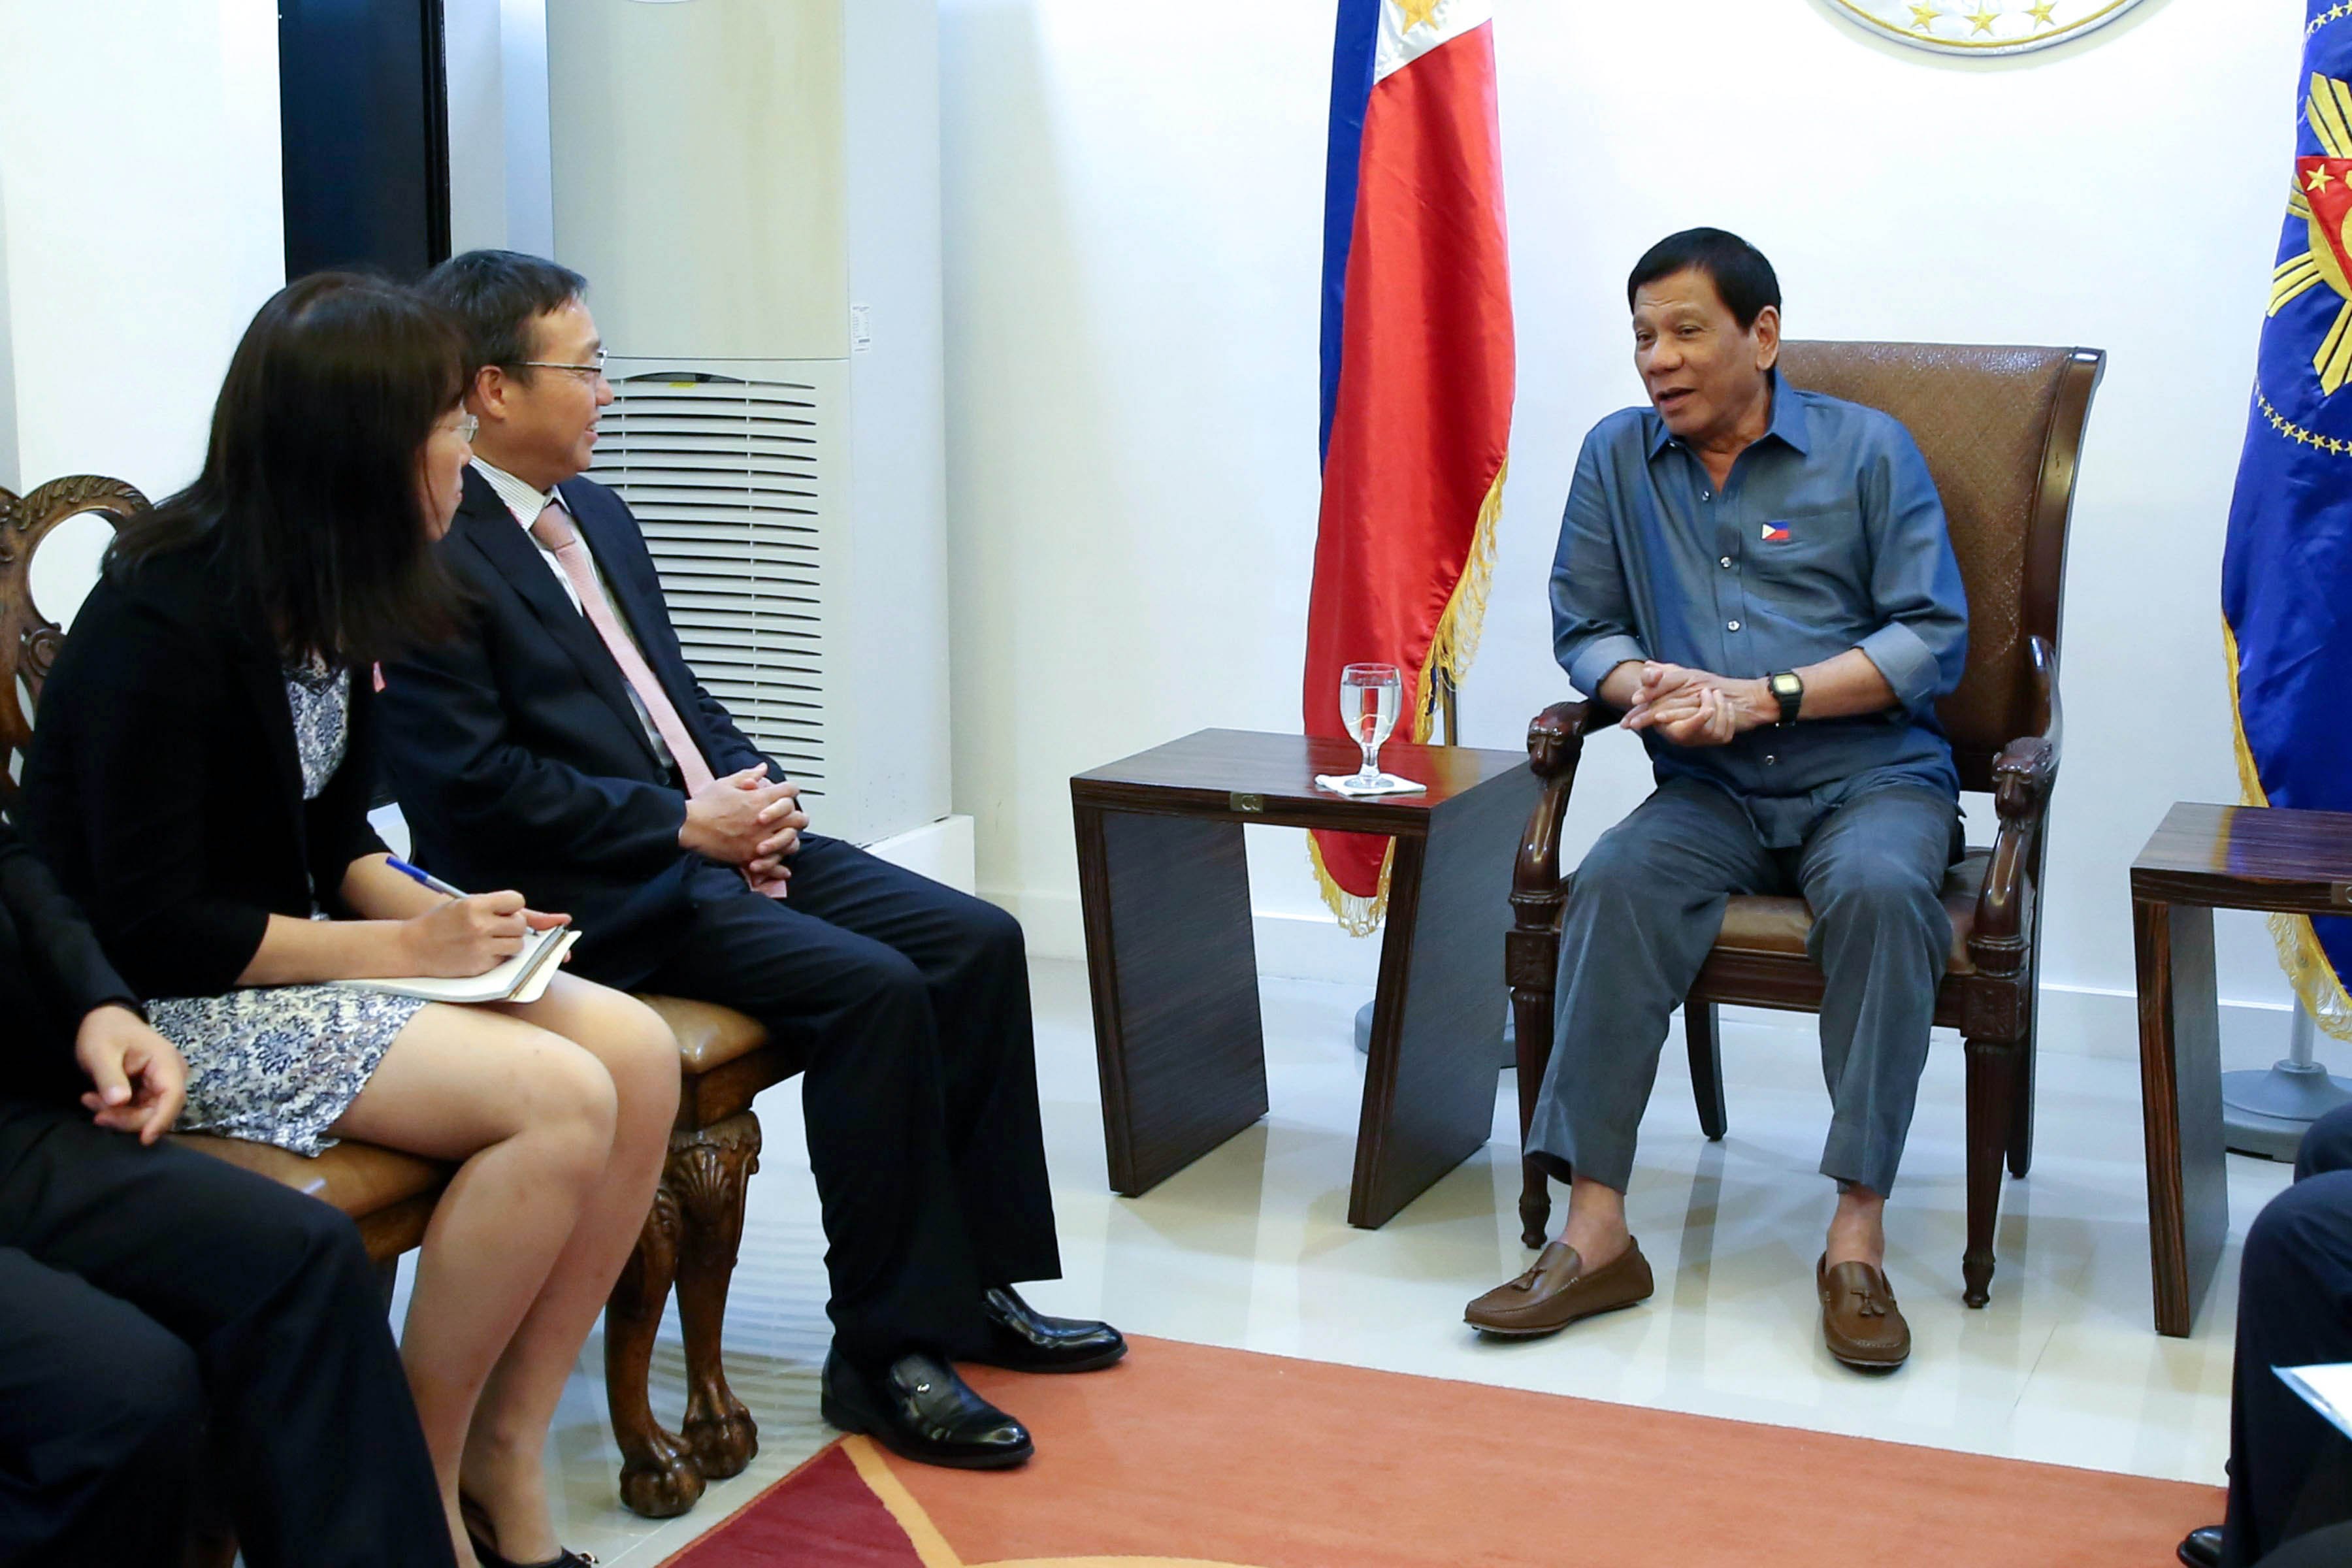 President Rodrigo Duterte meets with Bank of China Vice Chairman and President Chen Siqing